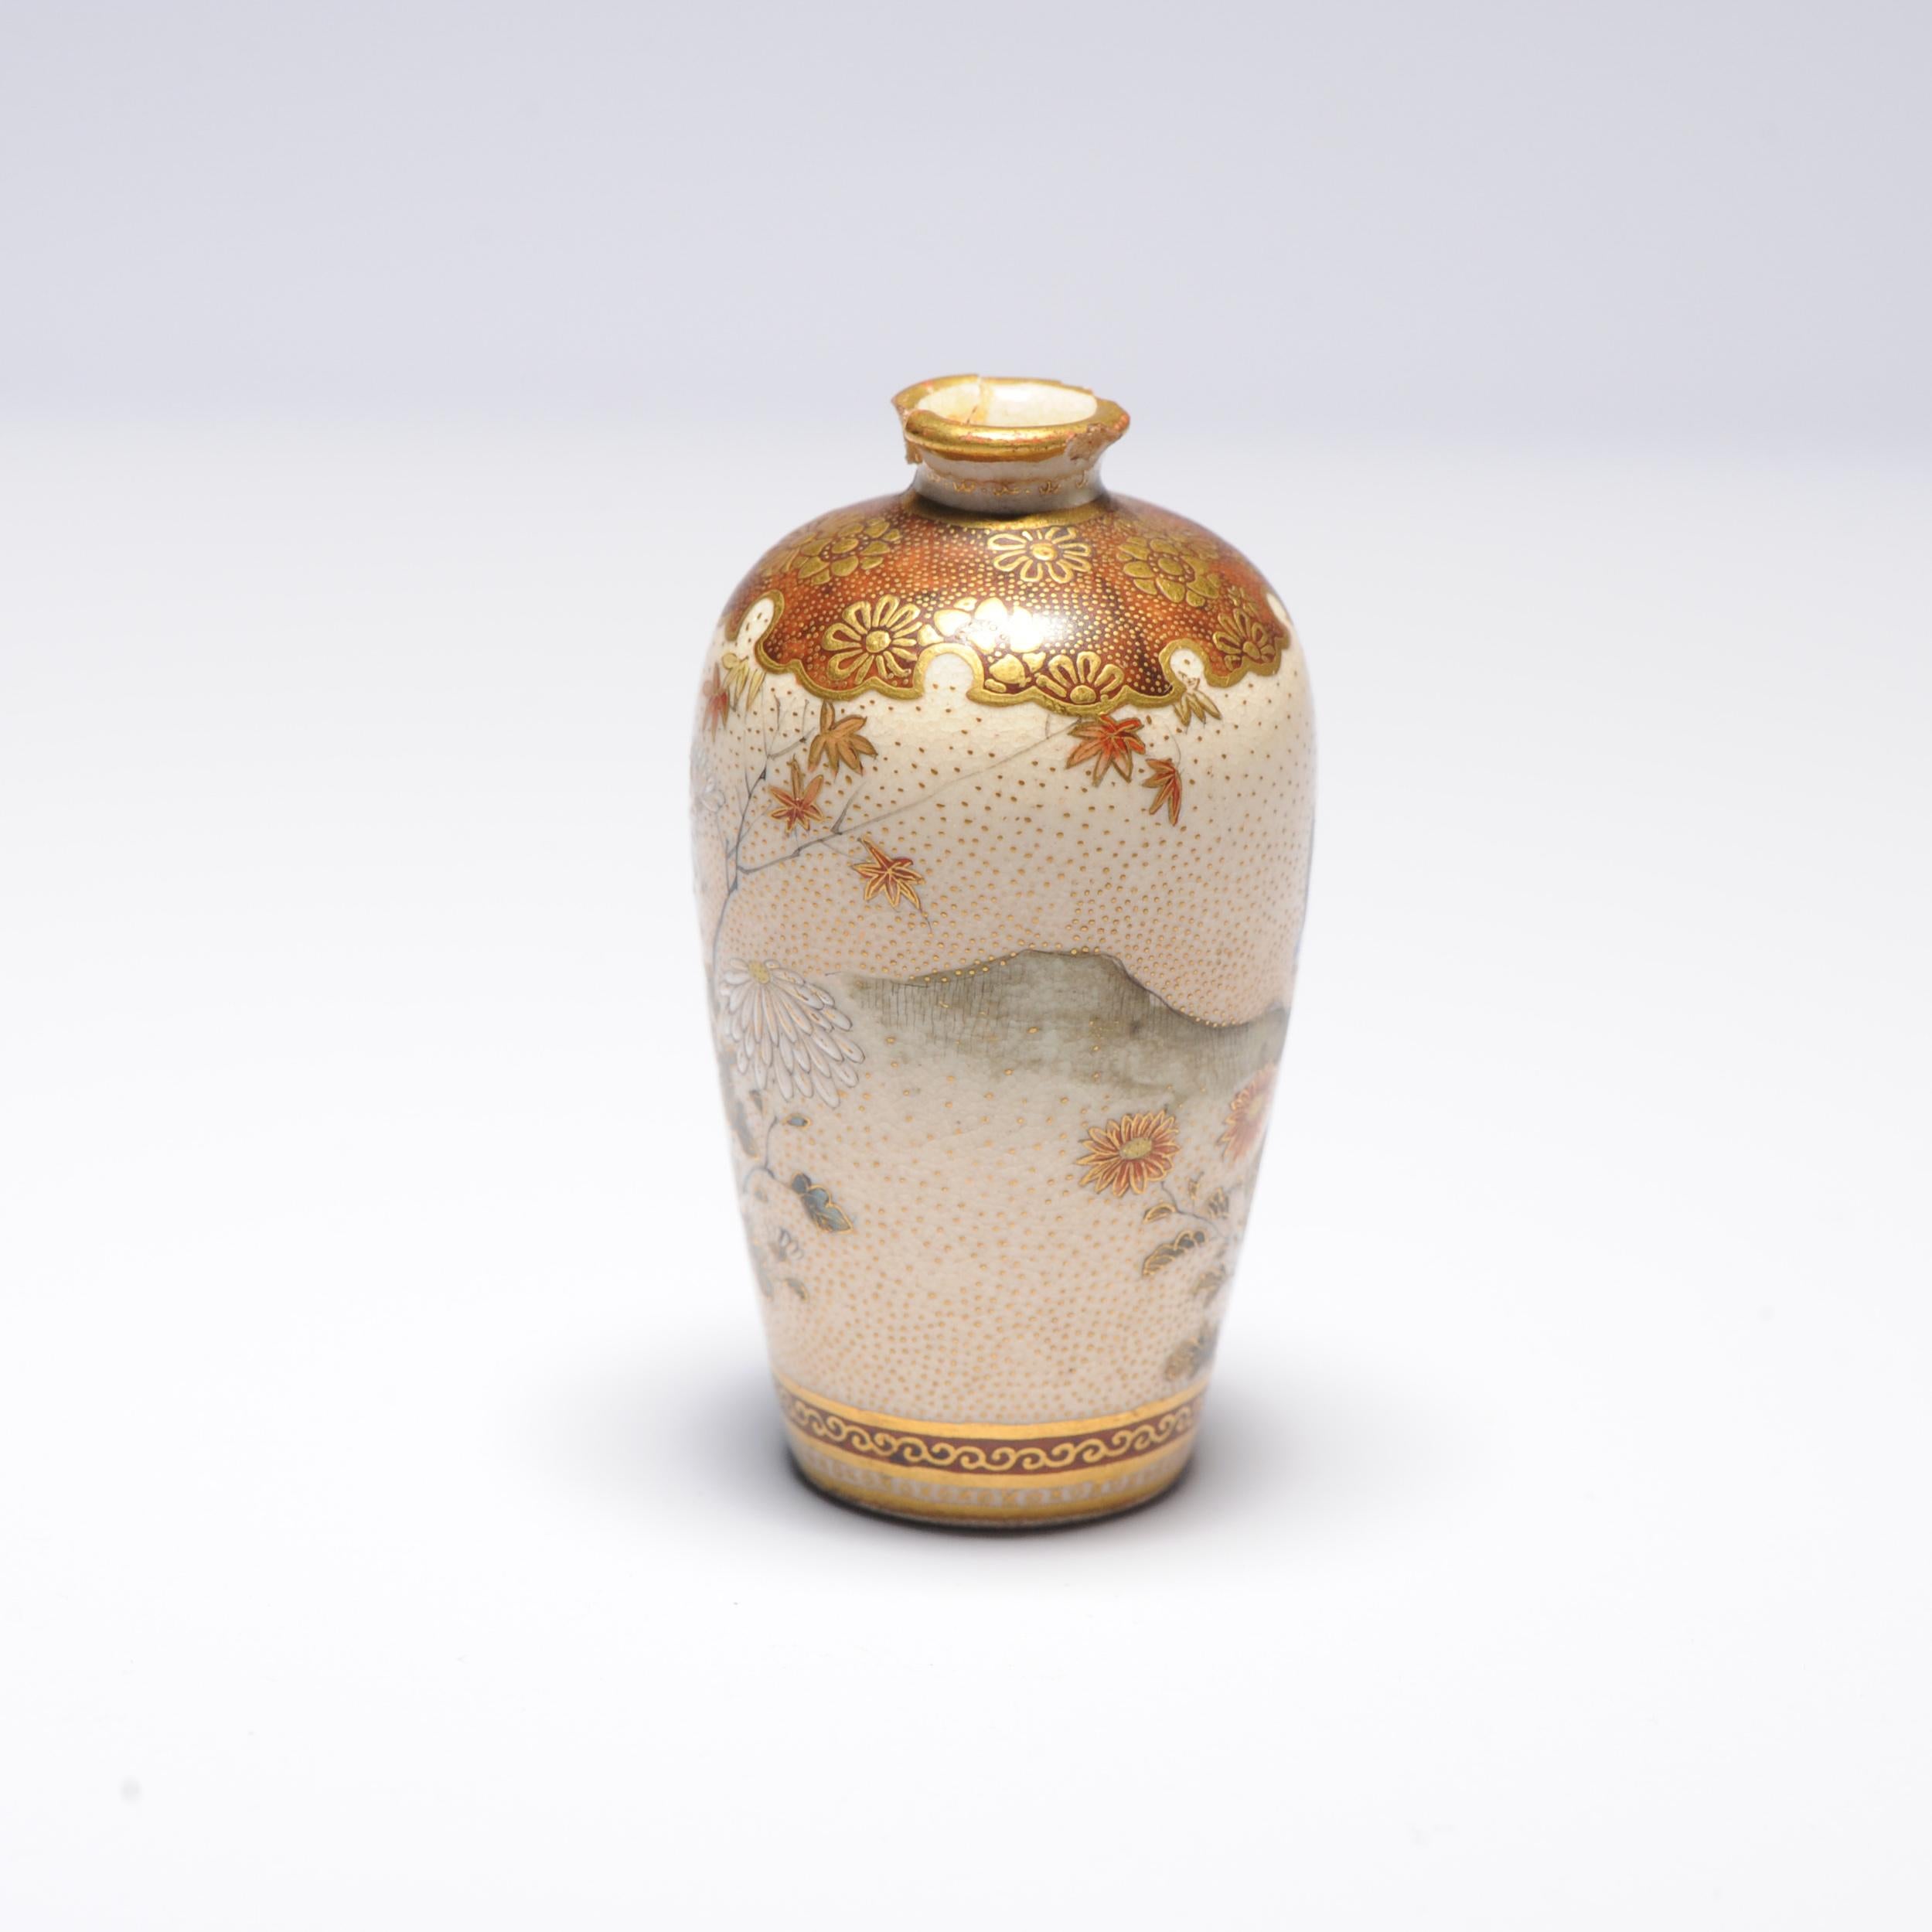 Antique ca 1900 Japanese Satsuma Top Quality Mini Vase Richly Decorated In Fair Condition For Sale In Amsterdam, Noord Holland